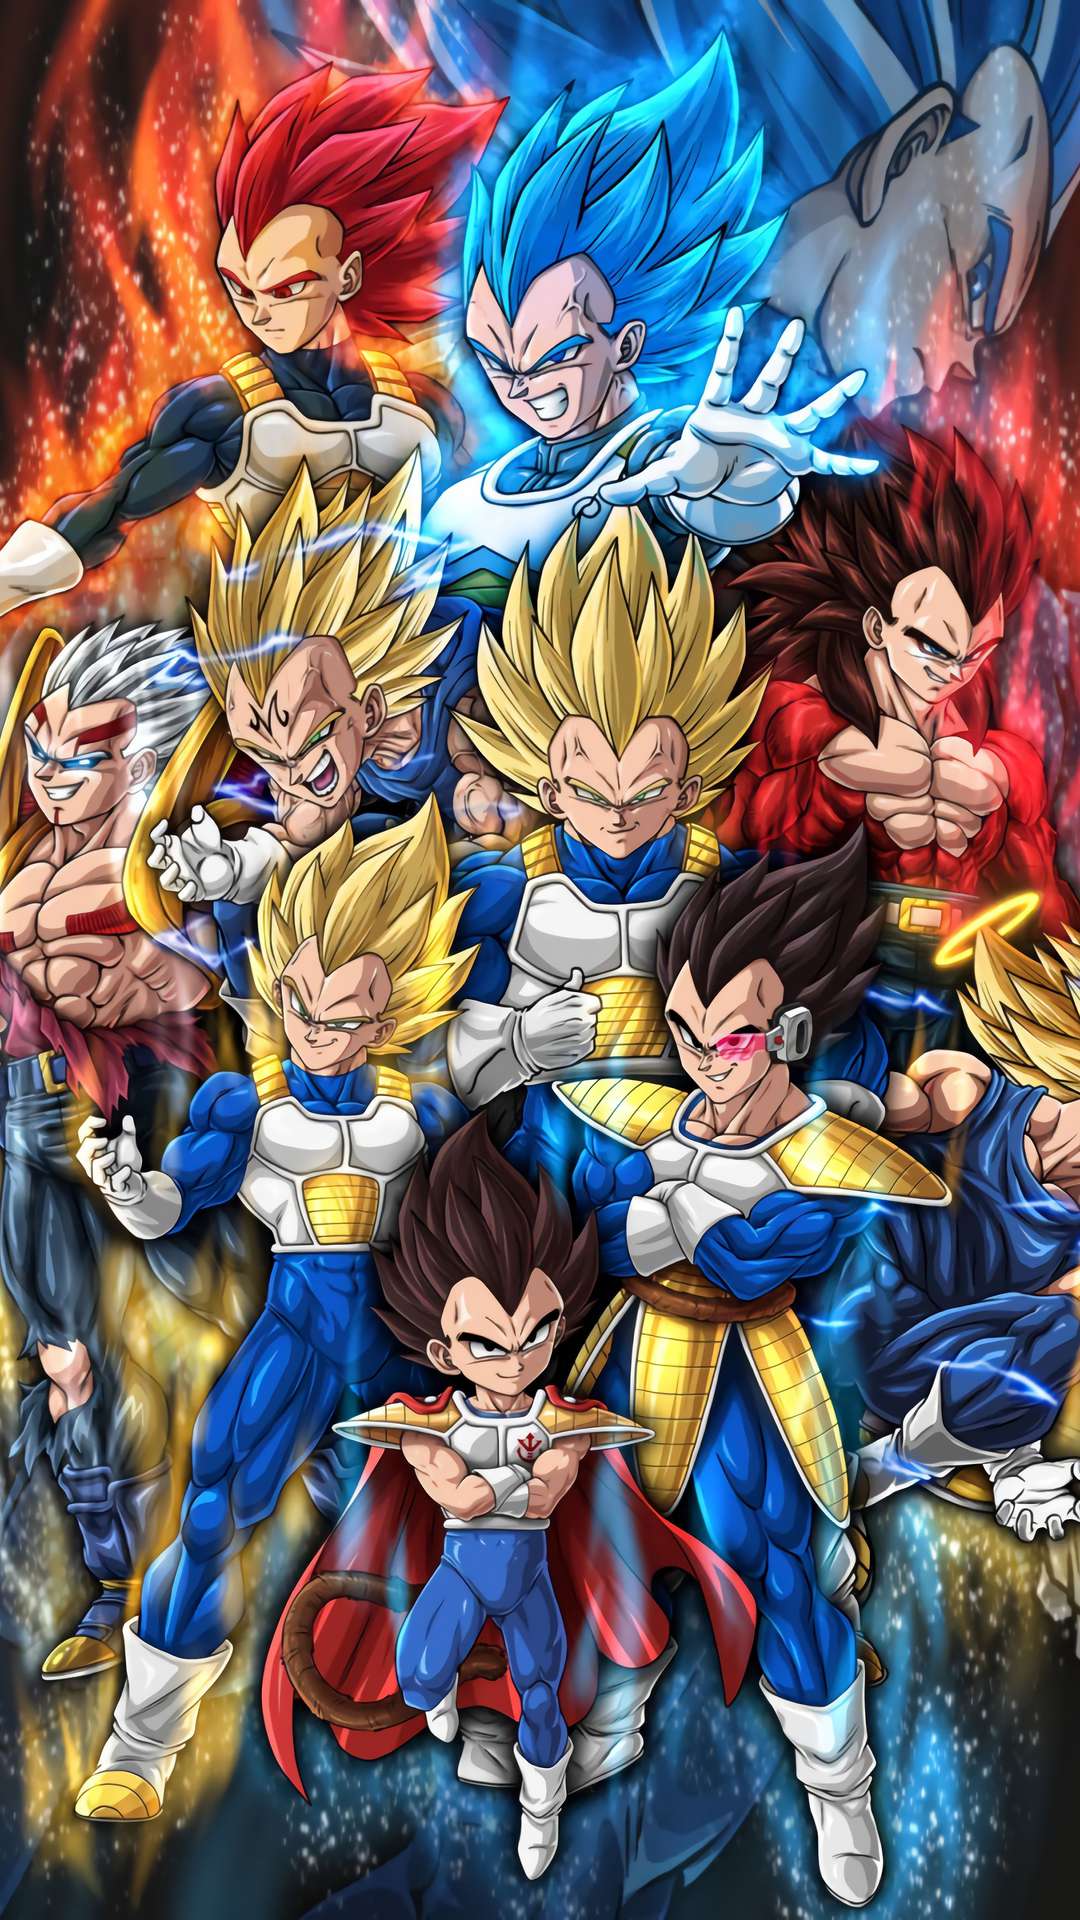 Download wallpaper 1280x2120 face off goku and vegeta dragon ball super  iphone 6 plus 1280x2120 hd background 3069